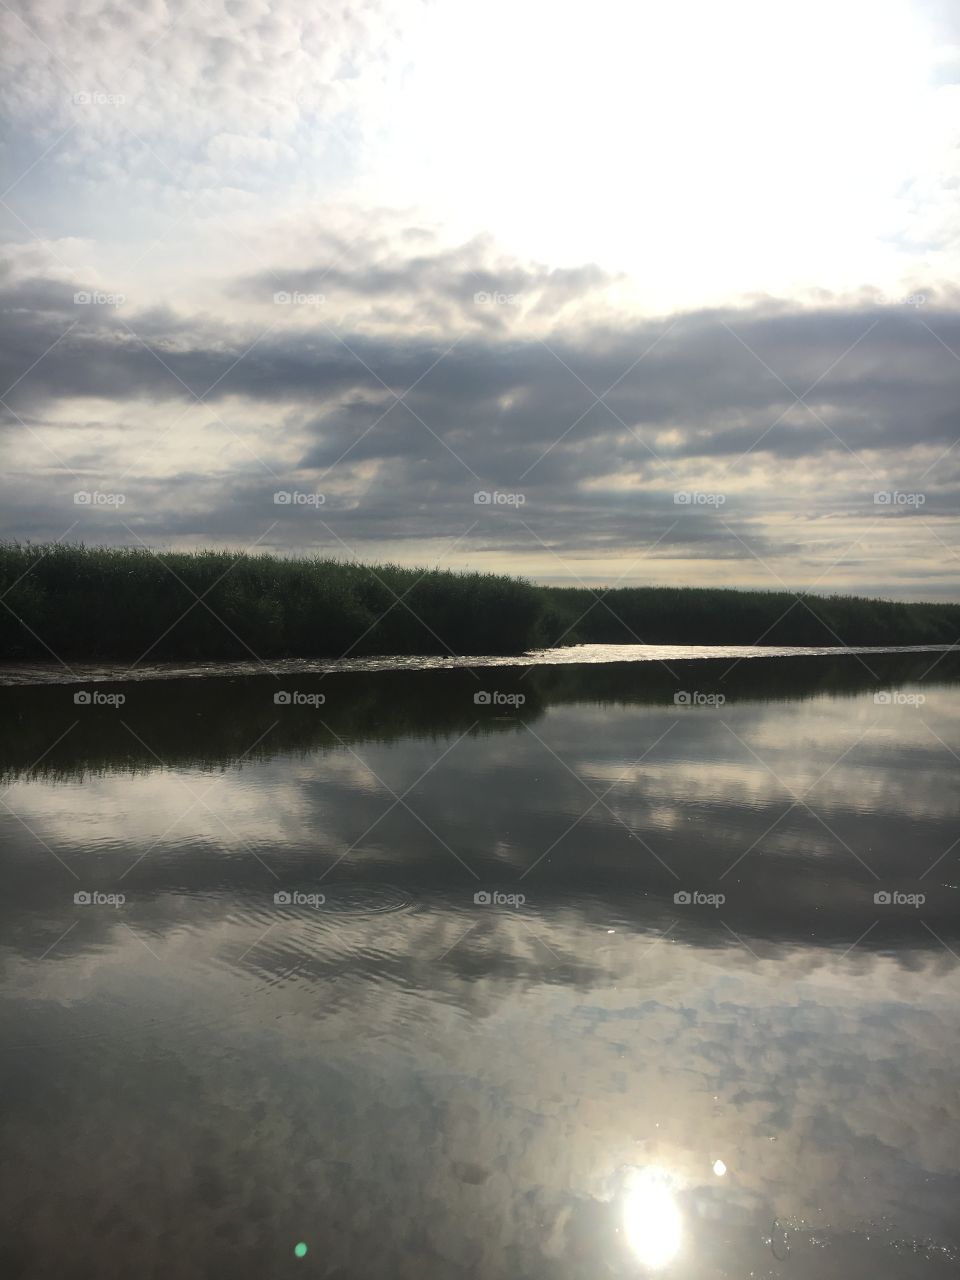 Clouds Reflection